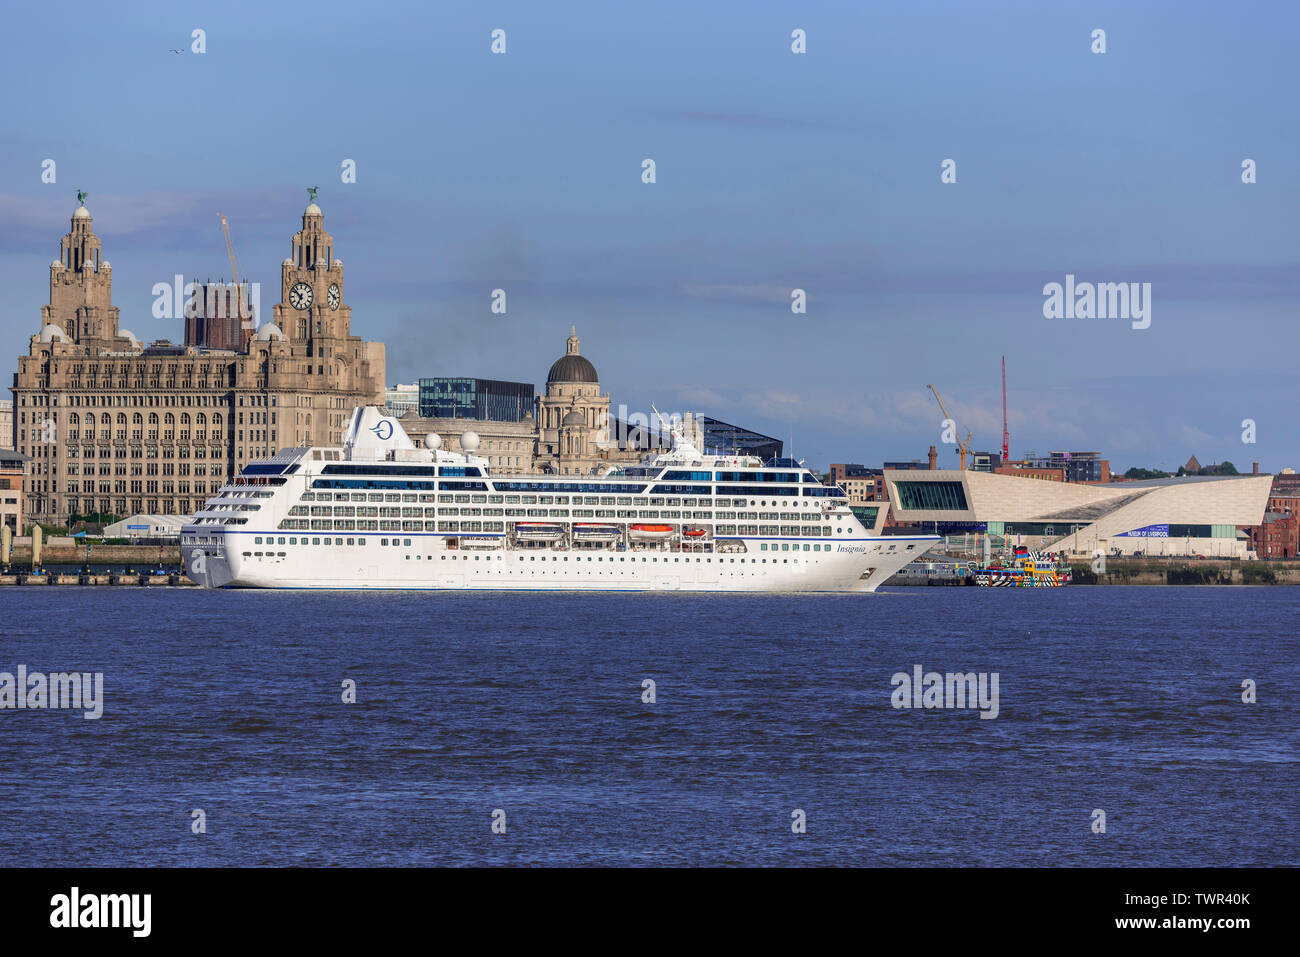 Invicta cruise ship. in the river Mersey at Liverpool pierhead. The Royal Liver building. left and the Museum of LIverpool right. Stock Photo